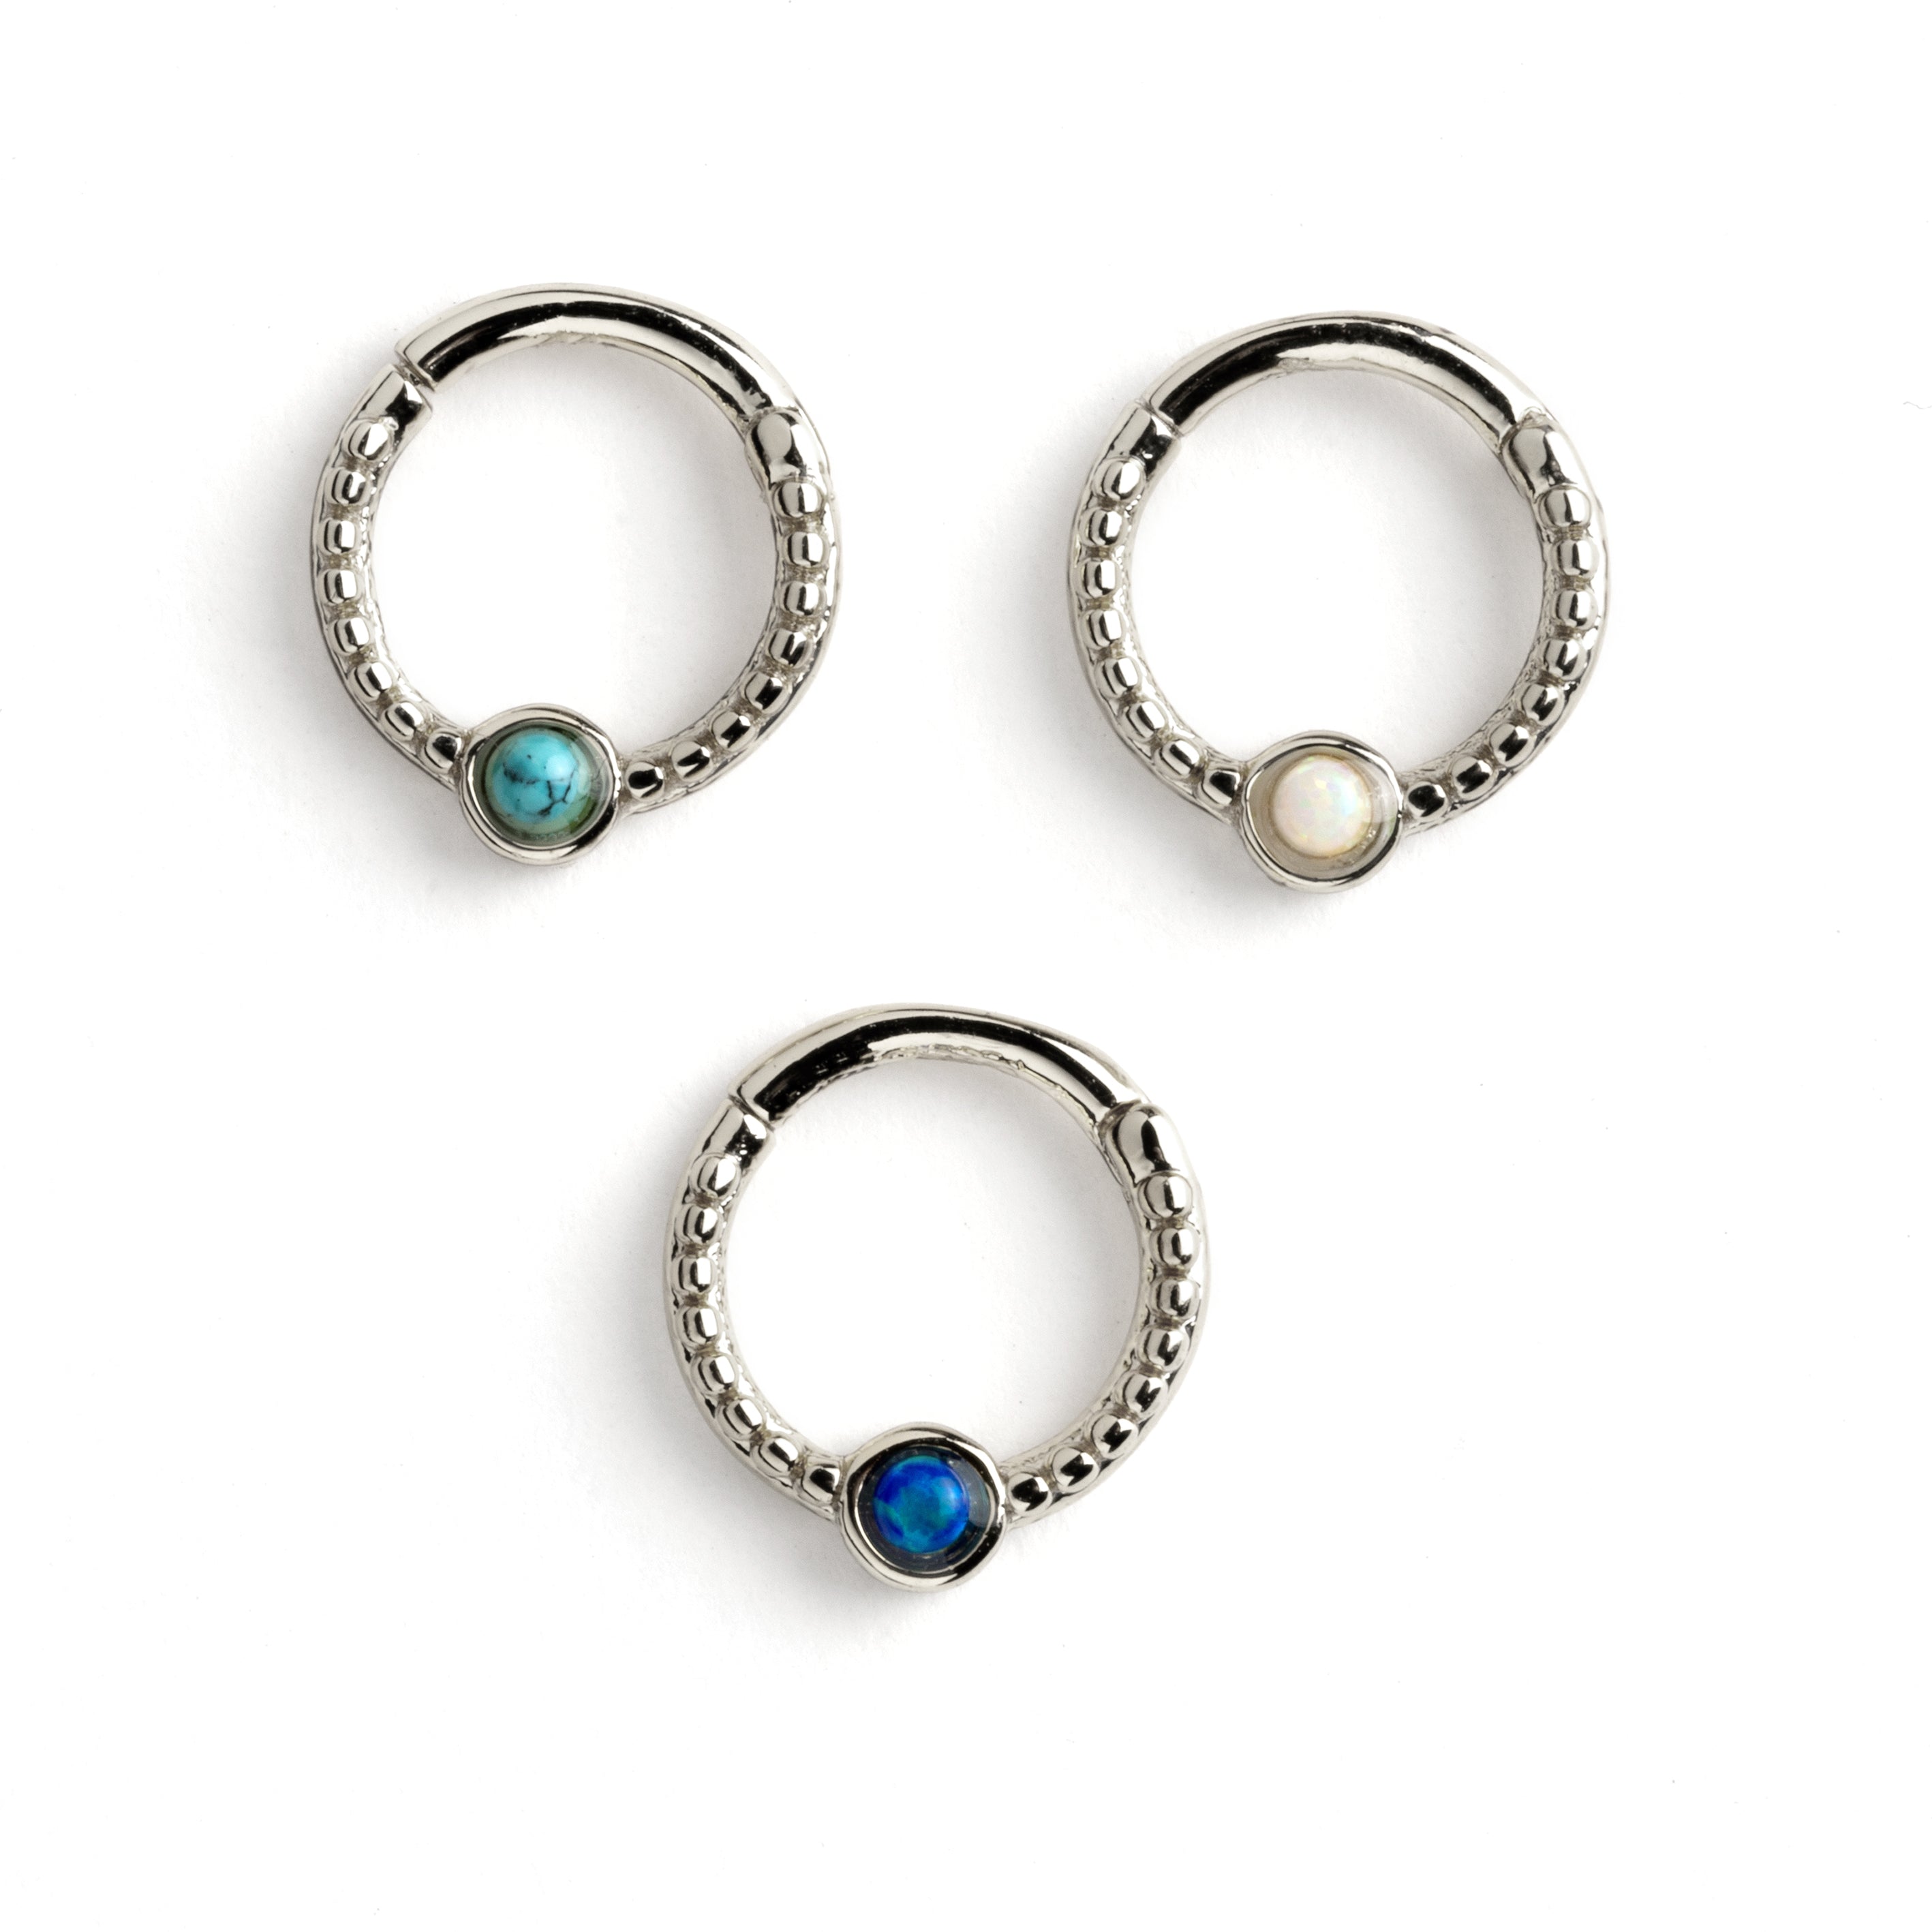 Dayaa surgical steel septum clicker with blue opai, white opal and turquoise frontal view 